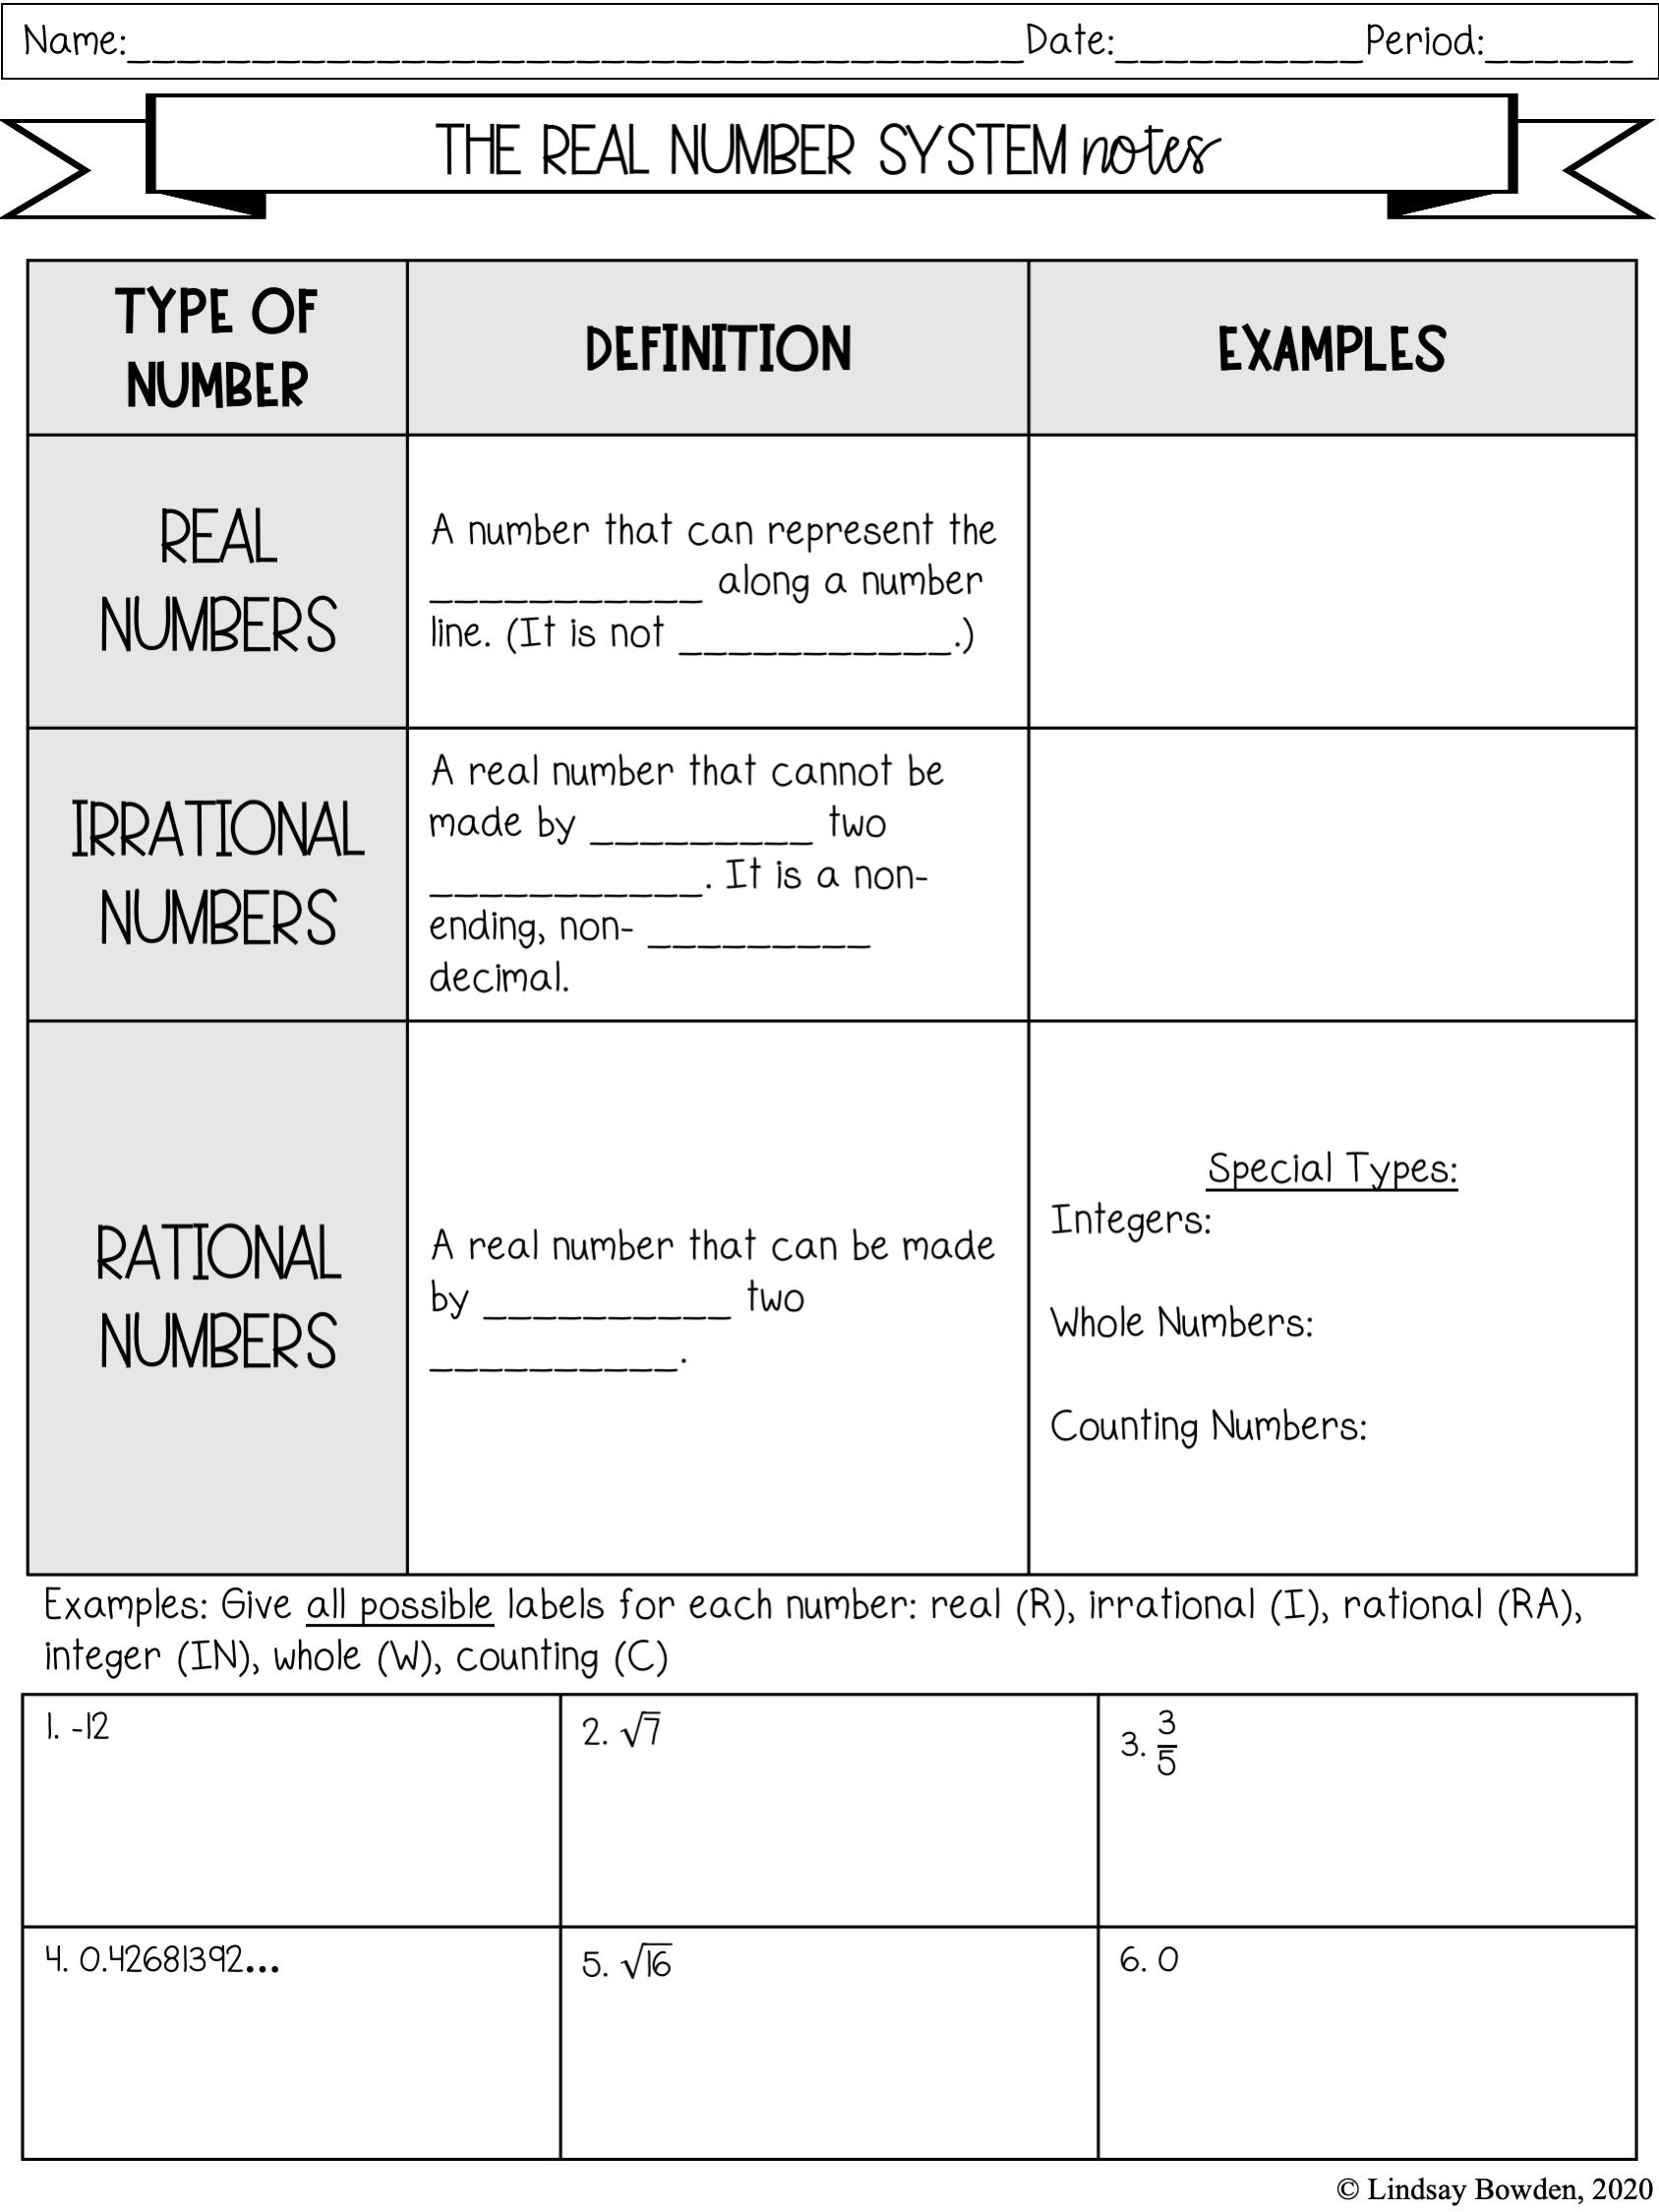 The Real Number System Notes and Worksheets - Lindsay Bowden For Real Number System Worksheet